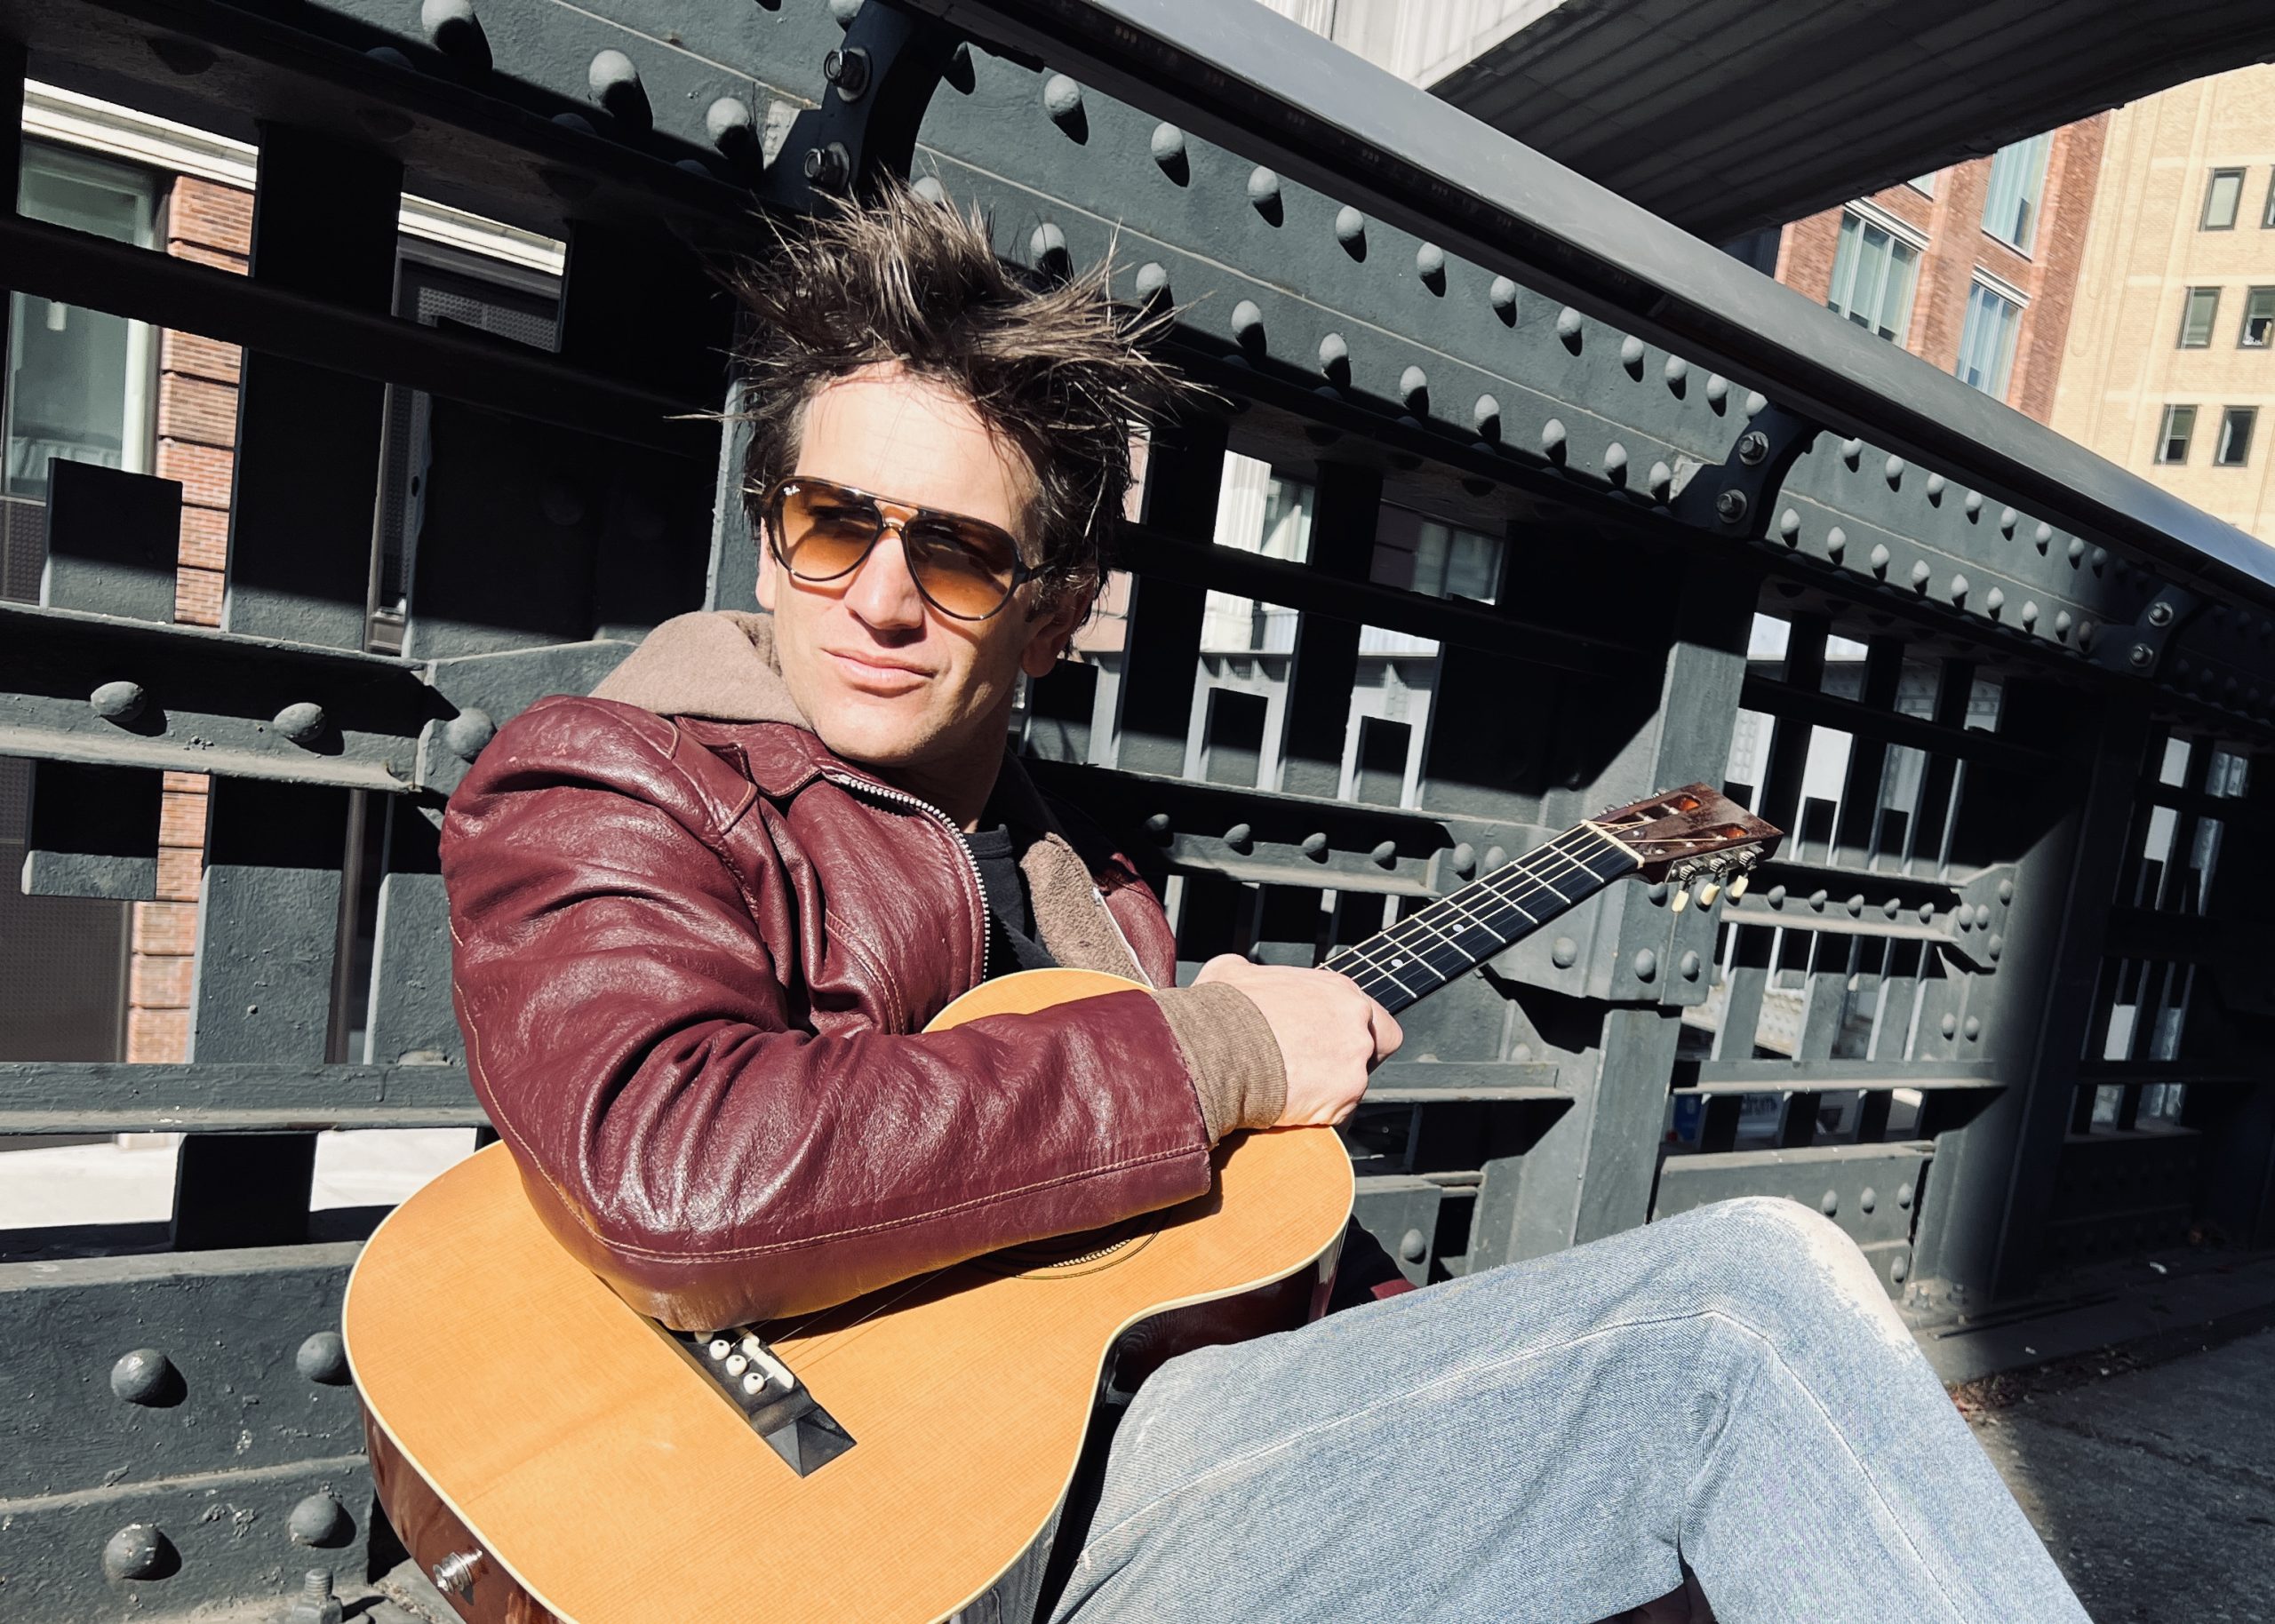 Gritty Indie Folk Singer Songwriter Dante Mazzetti with his guitar on The Highline in New York City